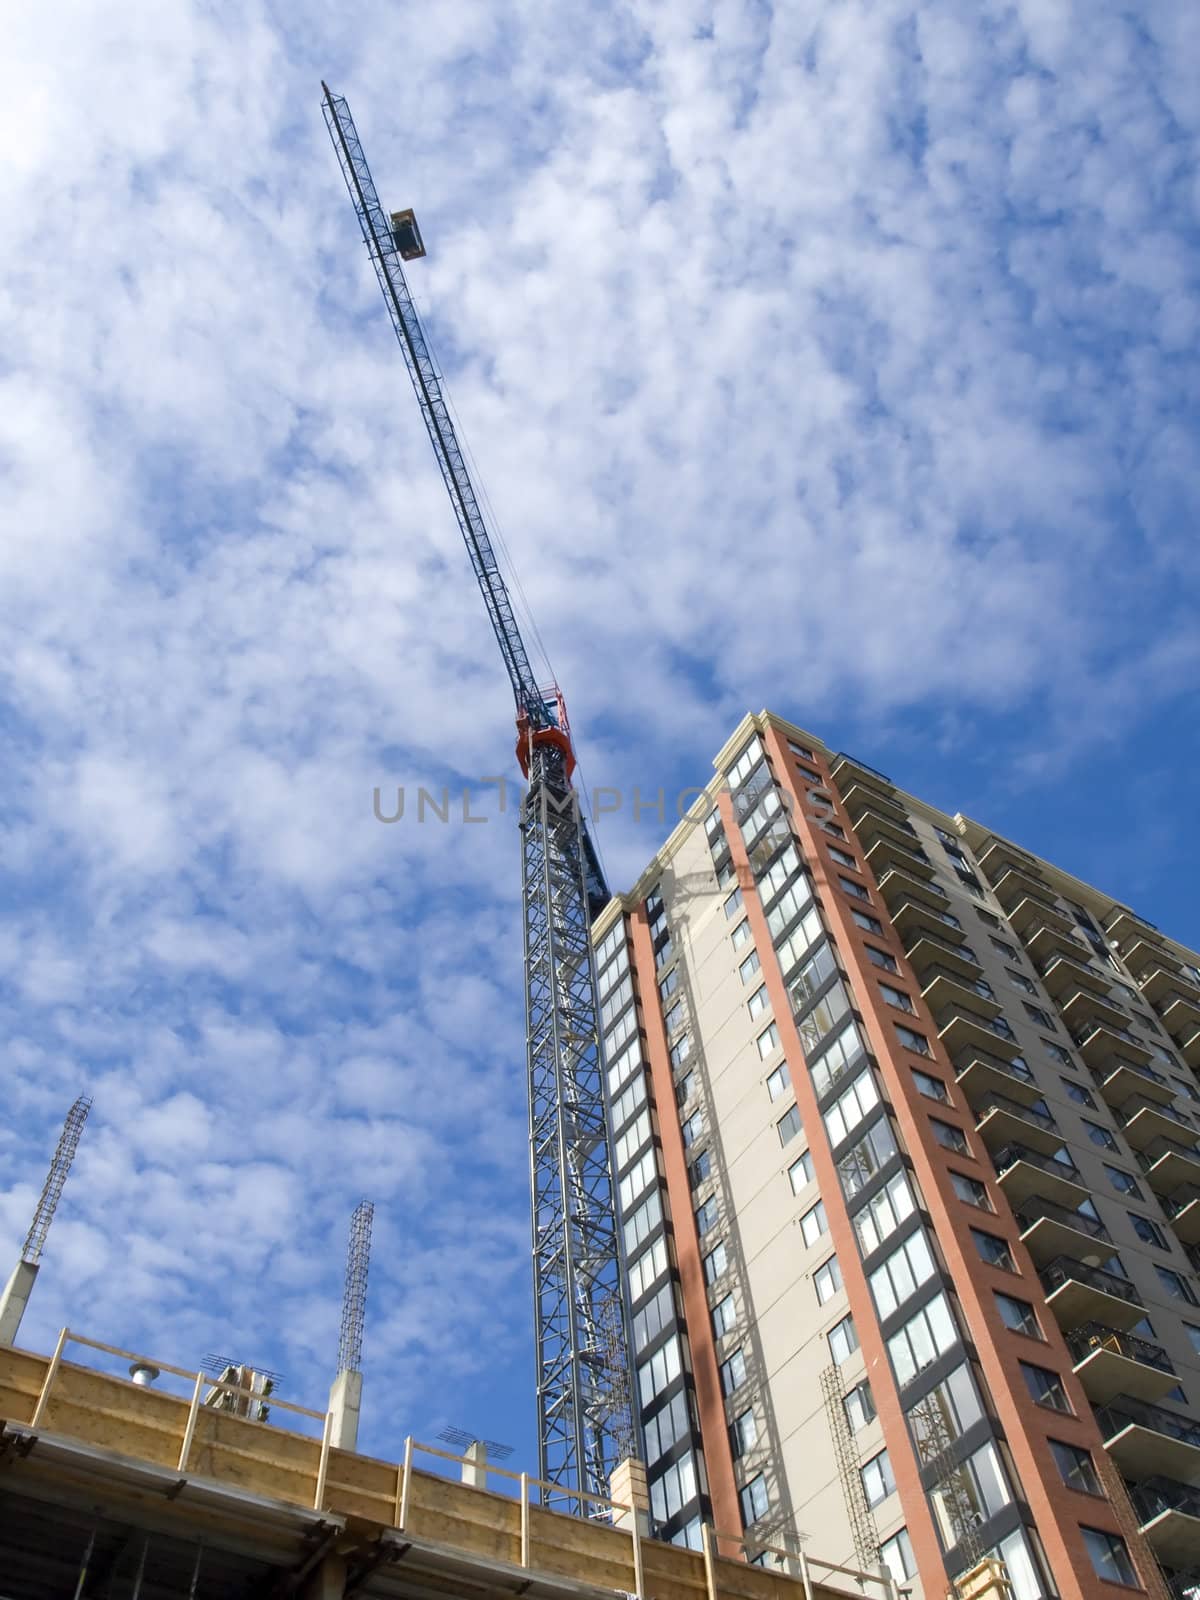 Crane towering over the city street on a condo construction site.